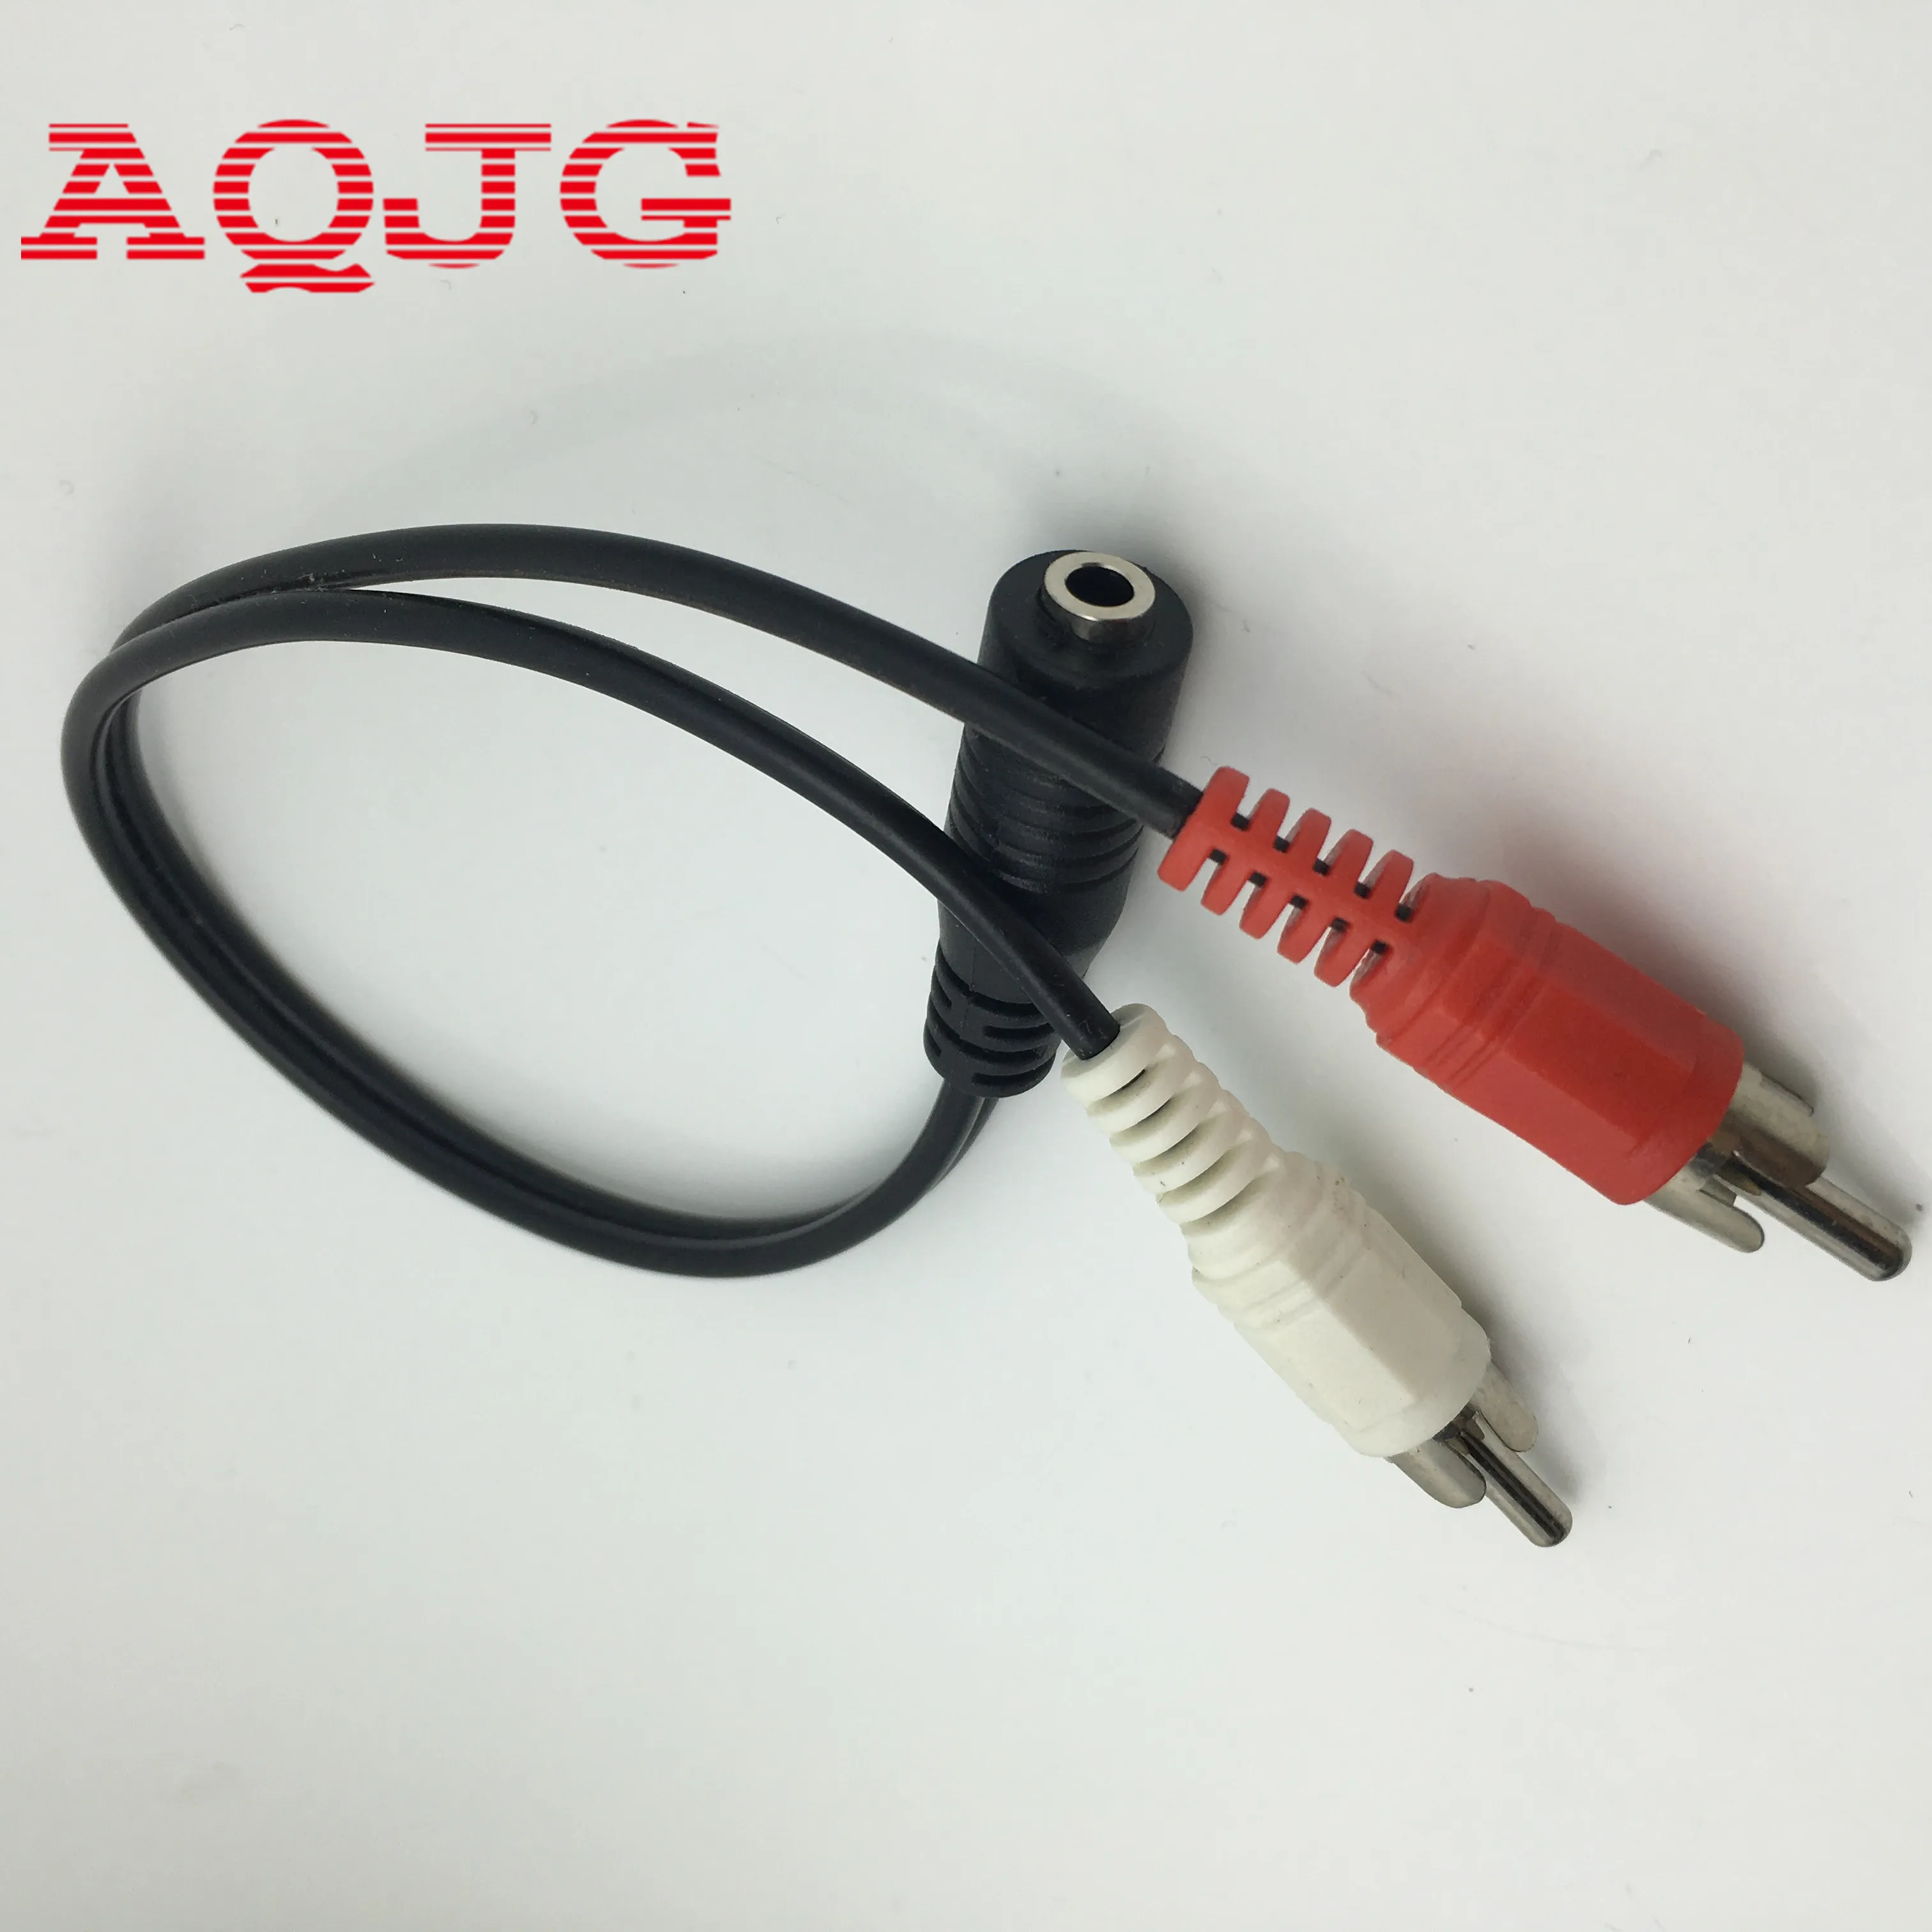 

Universal Rca Cable Stereo Audio 3.5mm Female Jack To 2RCA Male Socket Headphone 3.5 Y Adapter Video Cable AQJG 15CM